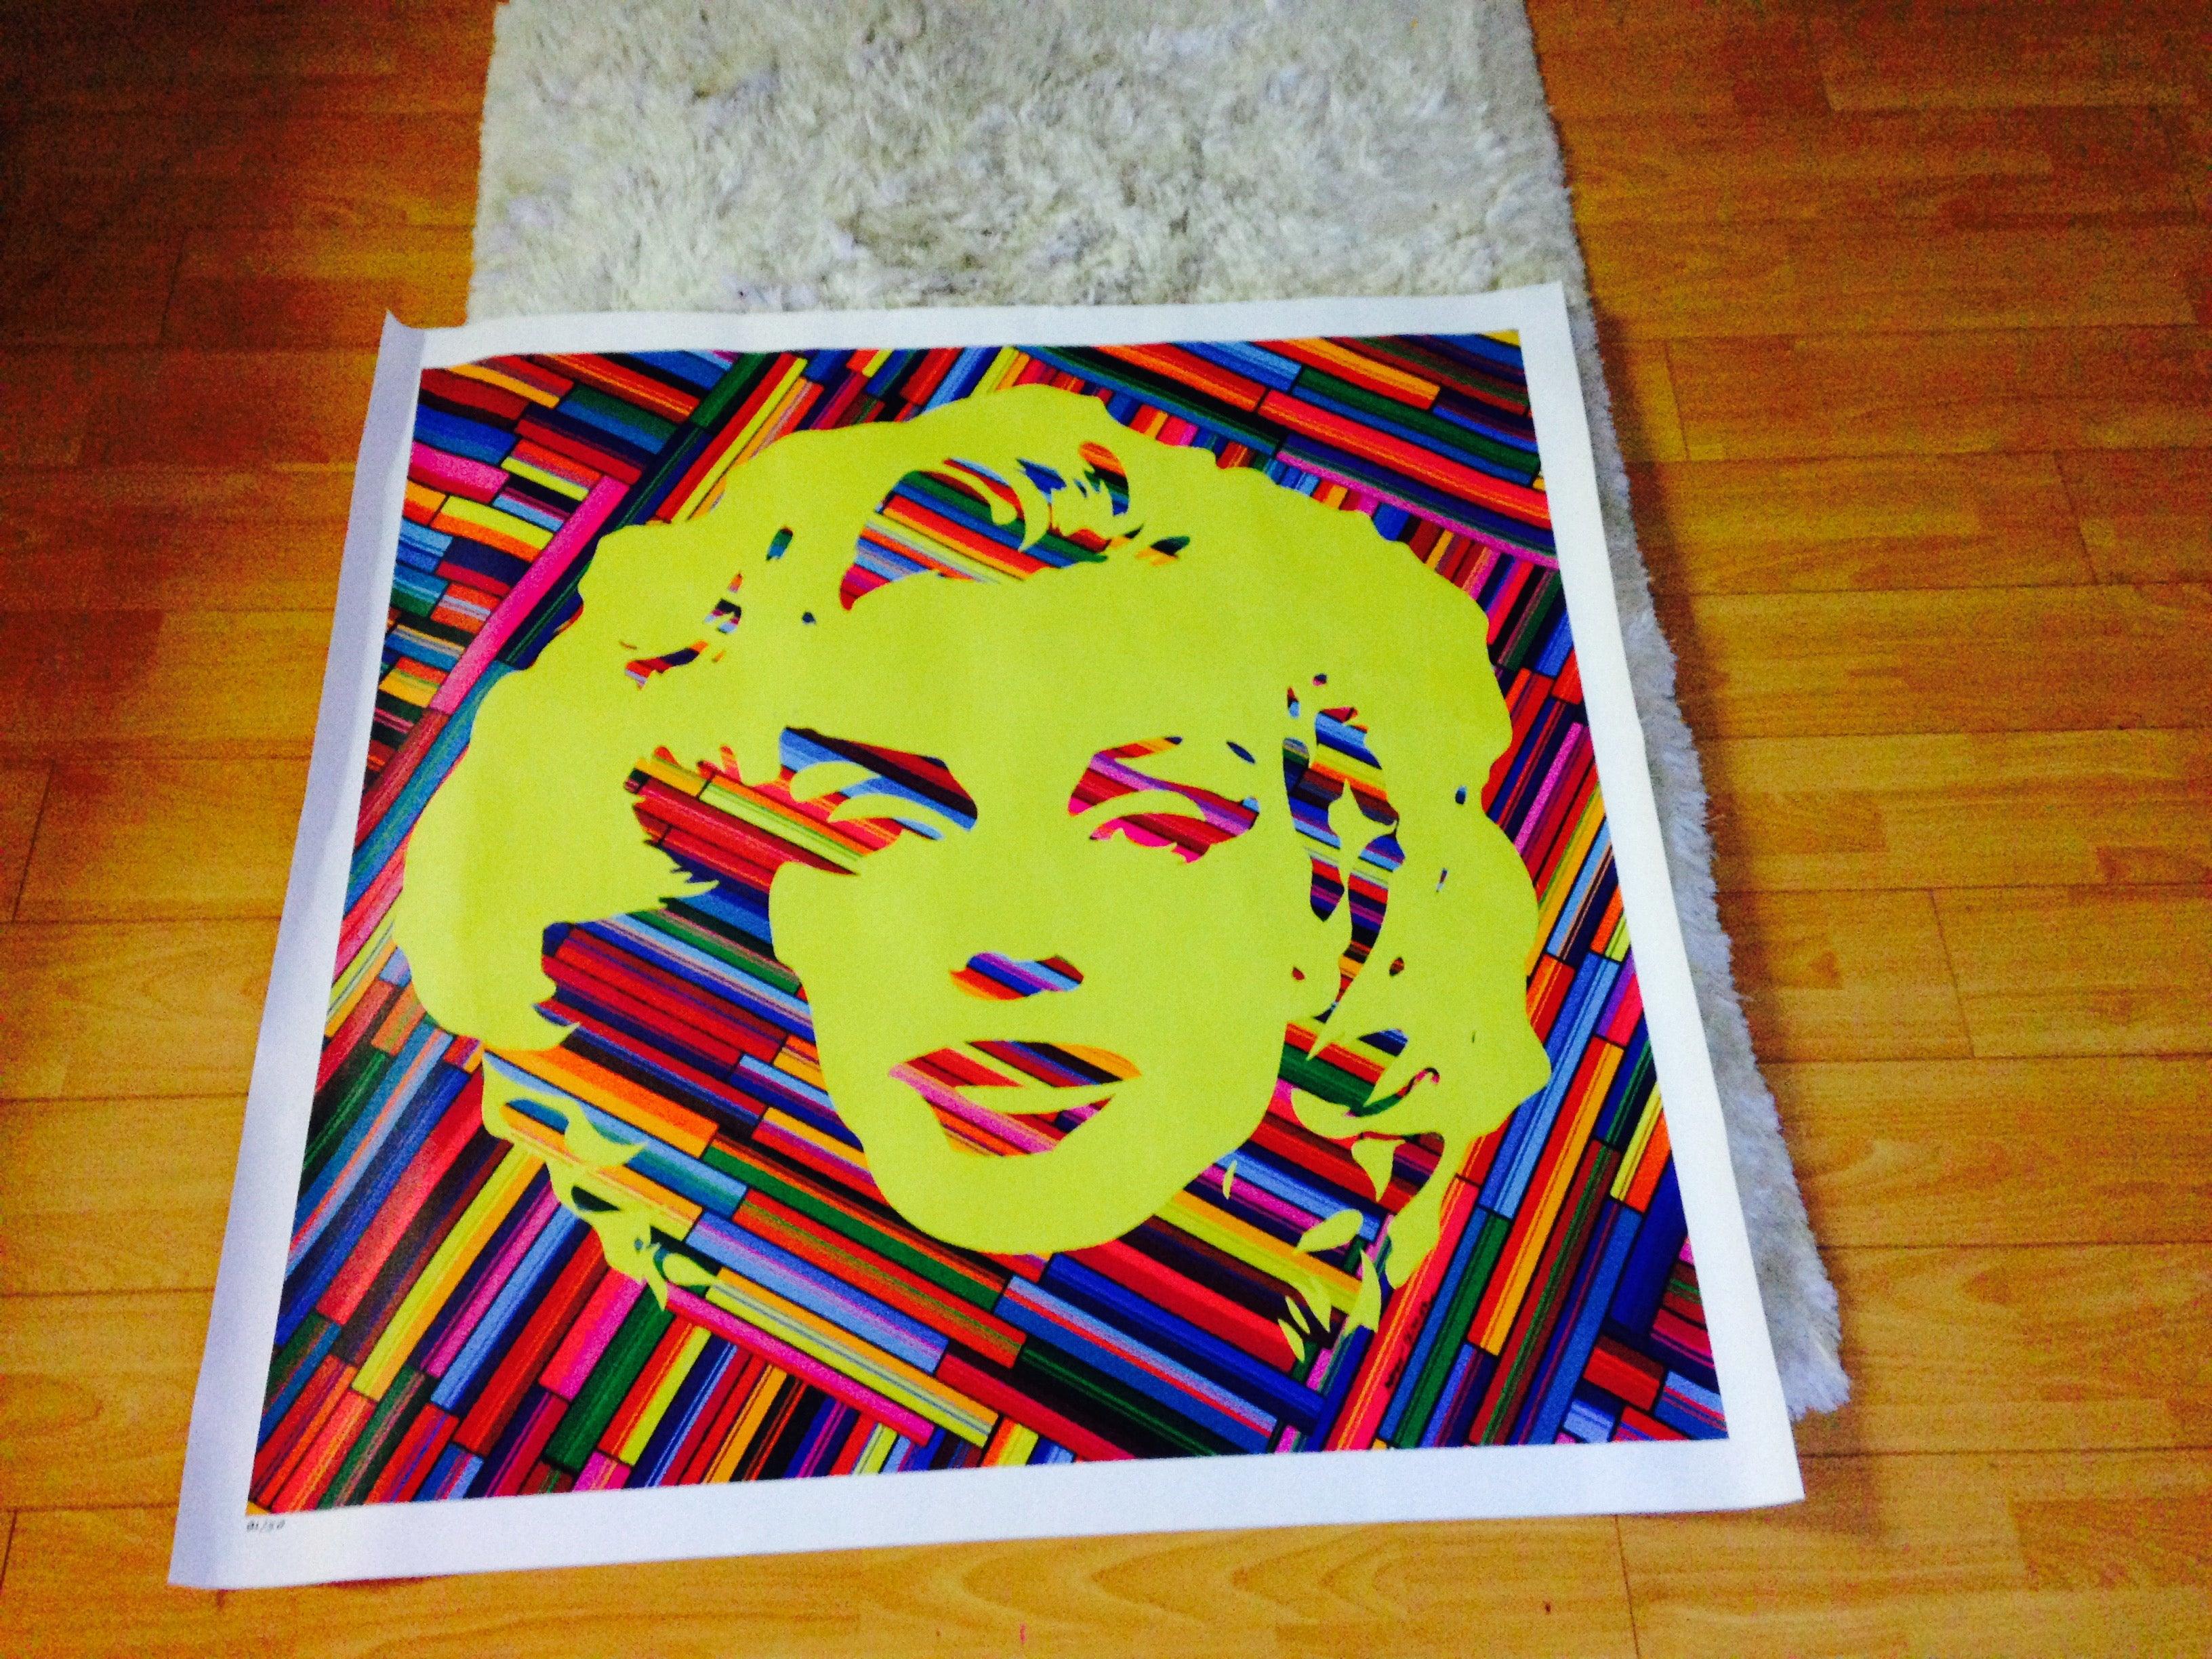              **ANNUAL SUPER SALE UNTIL APRIL 15TH ONLY**
**This Price Won't Be Repeated Again This Year - Take Advantage**

Celebrating the one and only Marilyn Monroe by Mauro Oliveira. 

Limited edition of 30 museum quality Giclee prints on